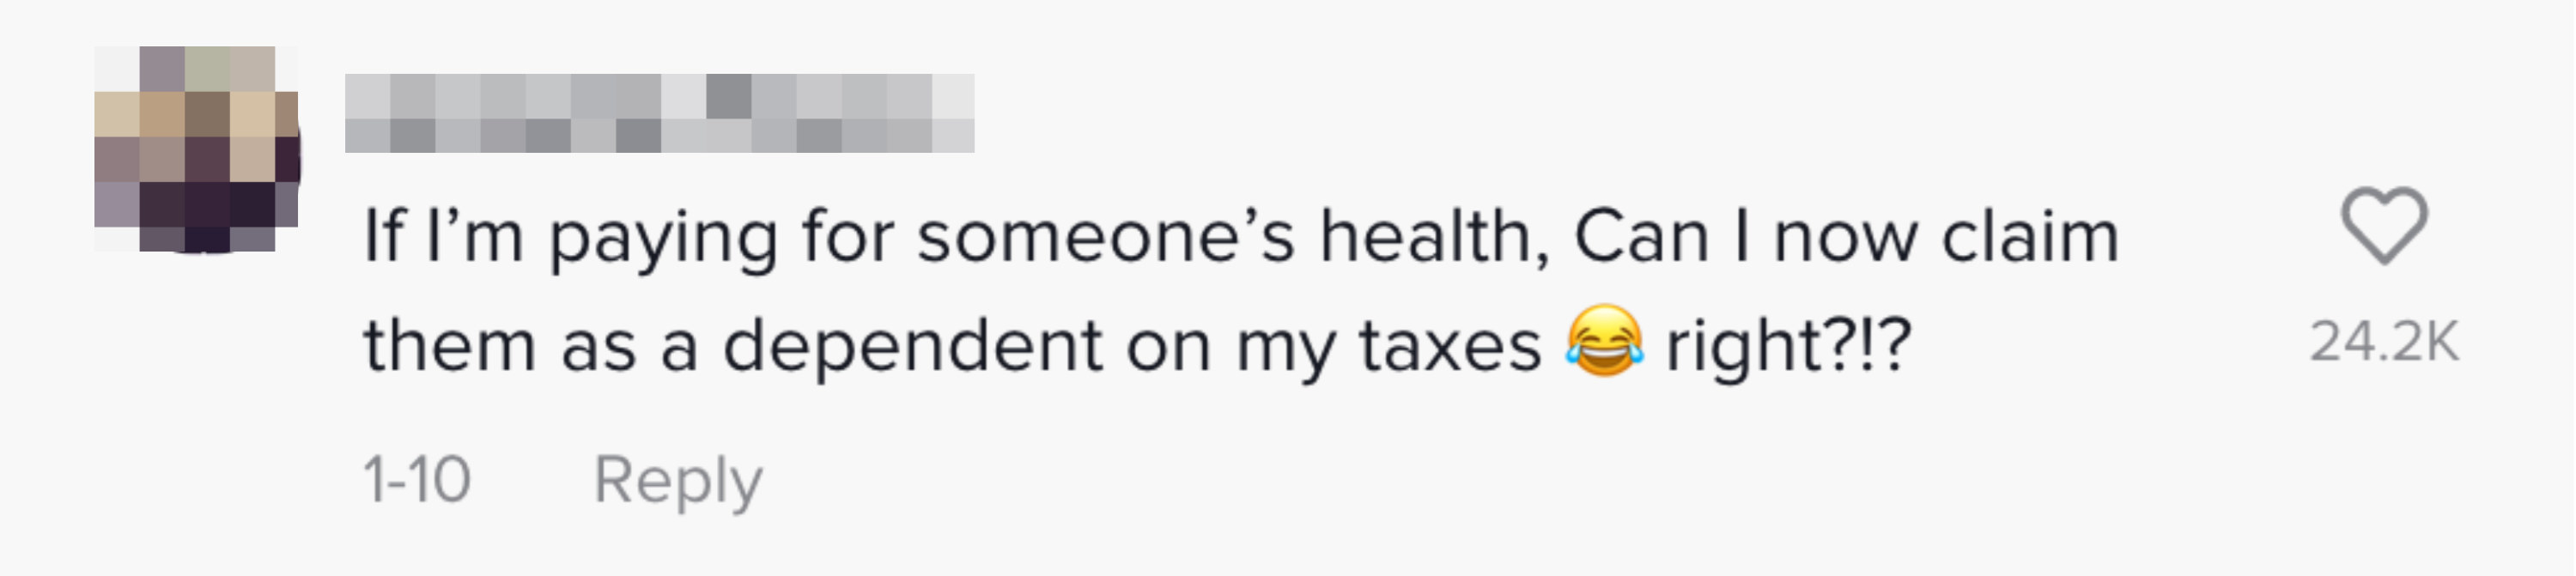 If I&#x27;m paying for someone&#x27;s health, can I claim them as a dependent on my taxes?